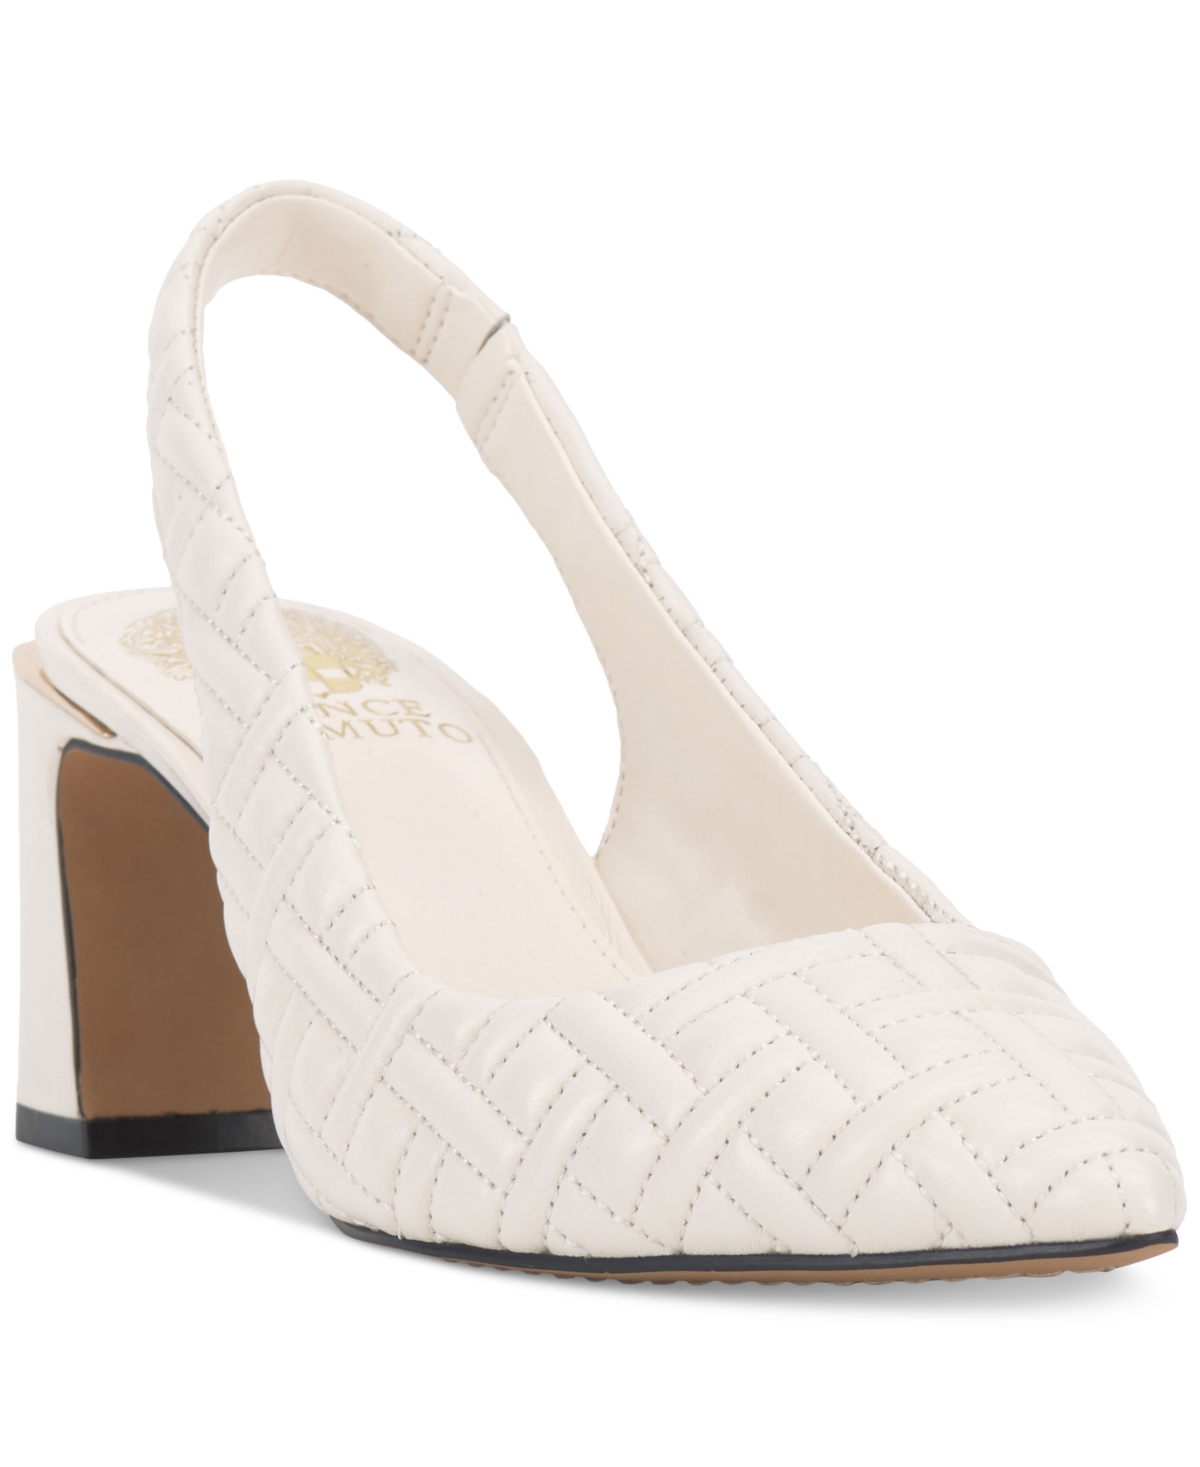 Shop Vince Camuto Women's Hamden Slingback Pumps In Coconut Cream Quilted Leather